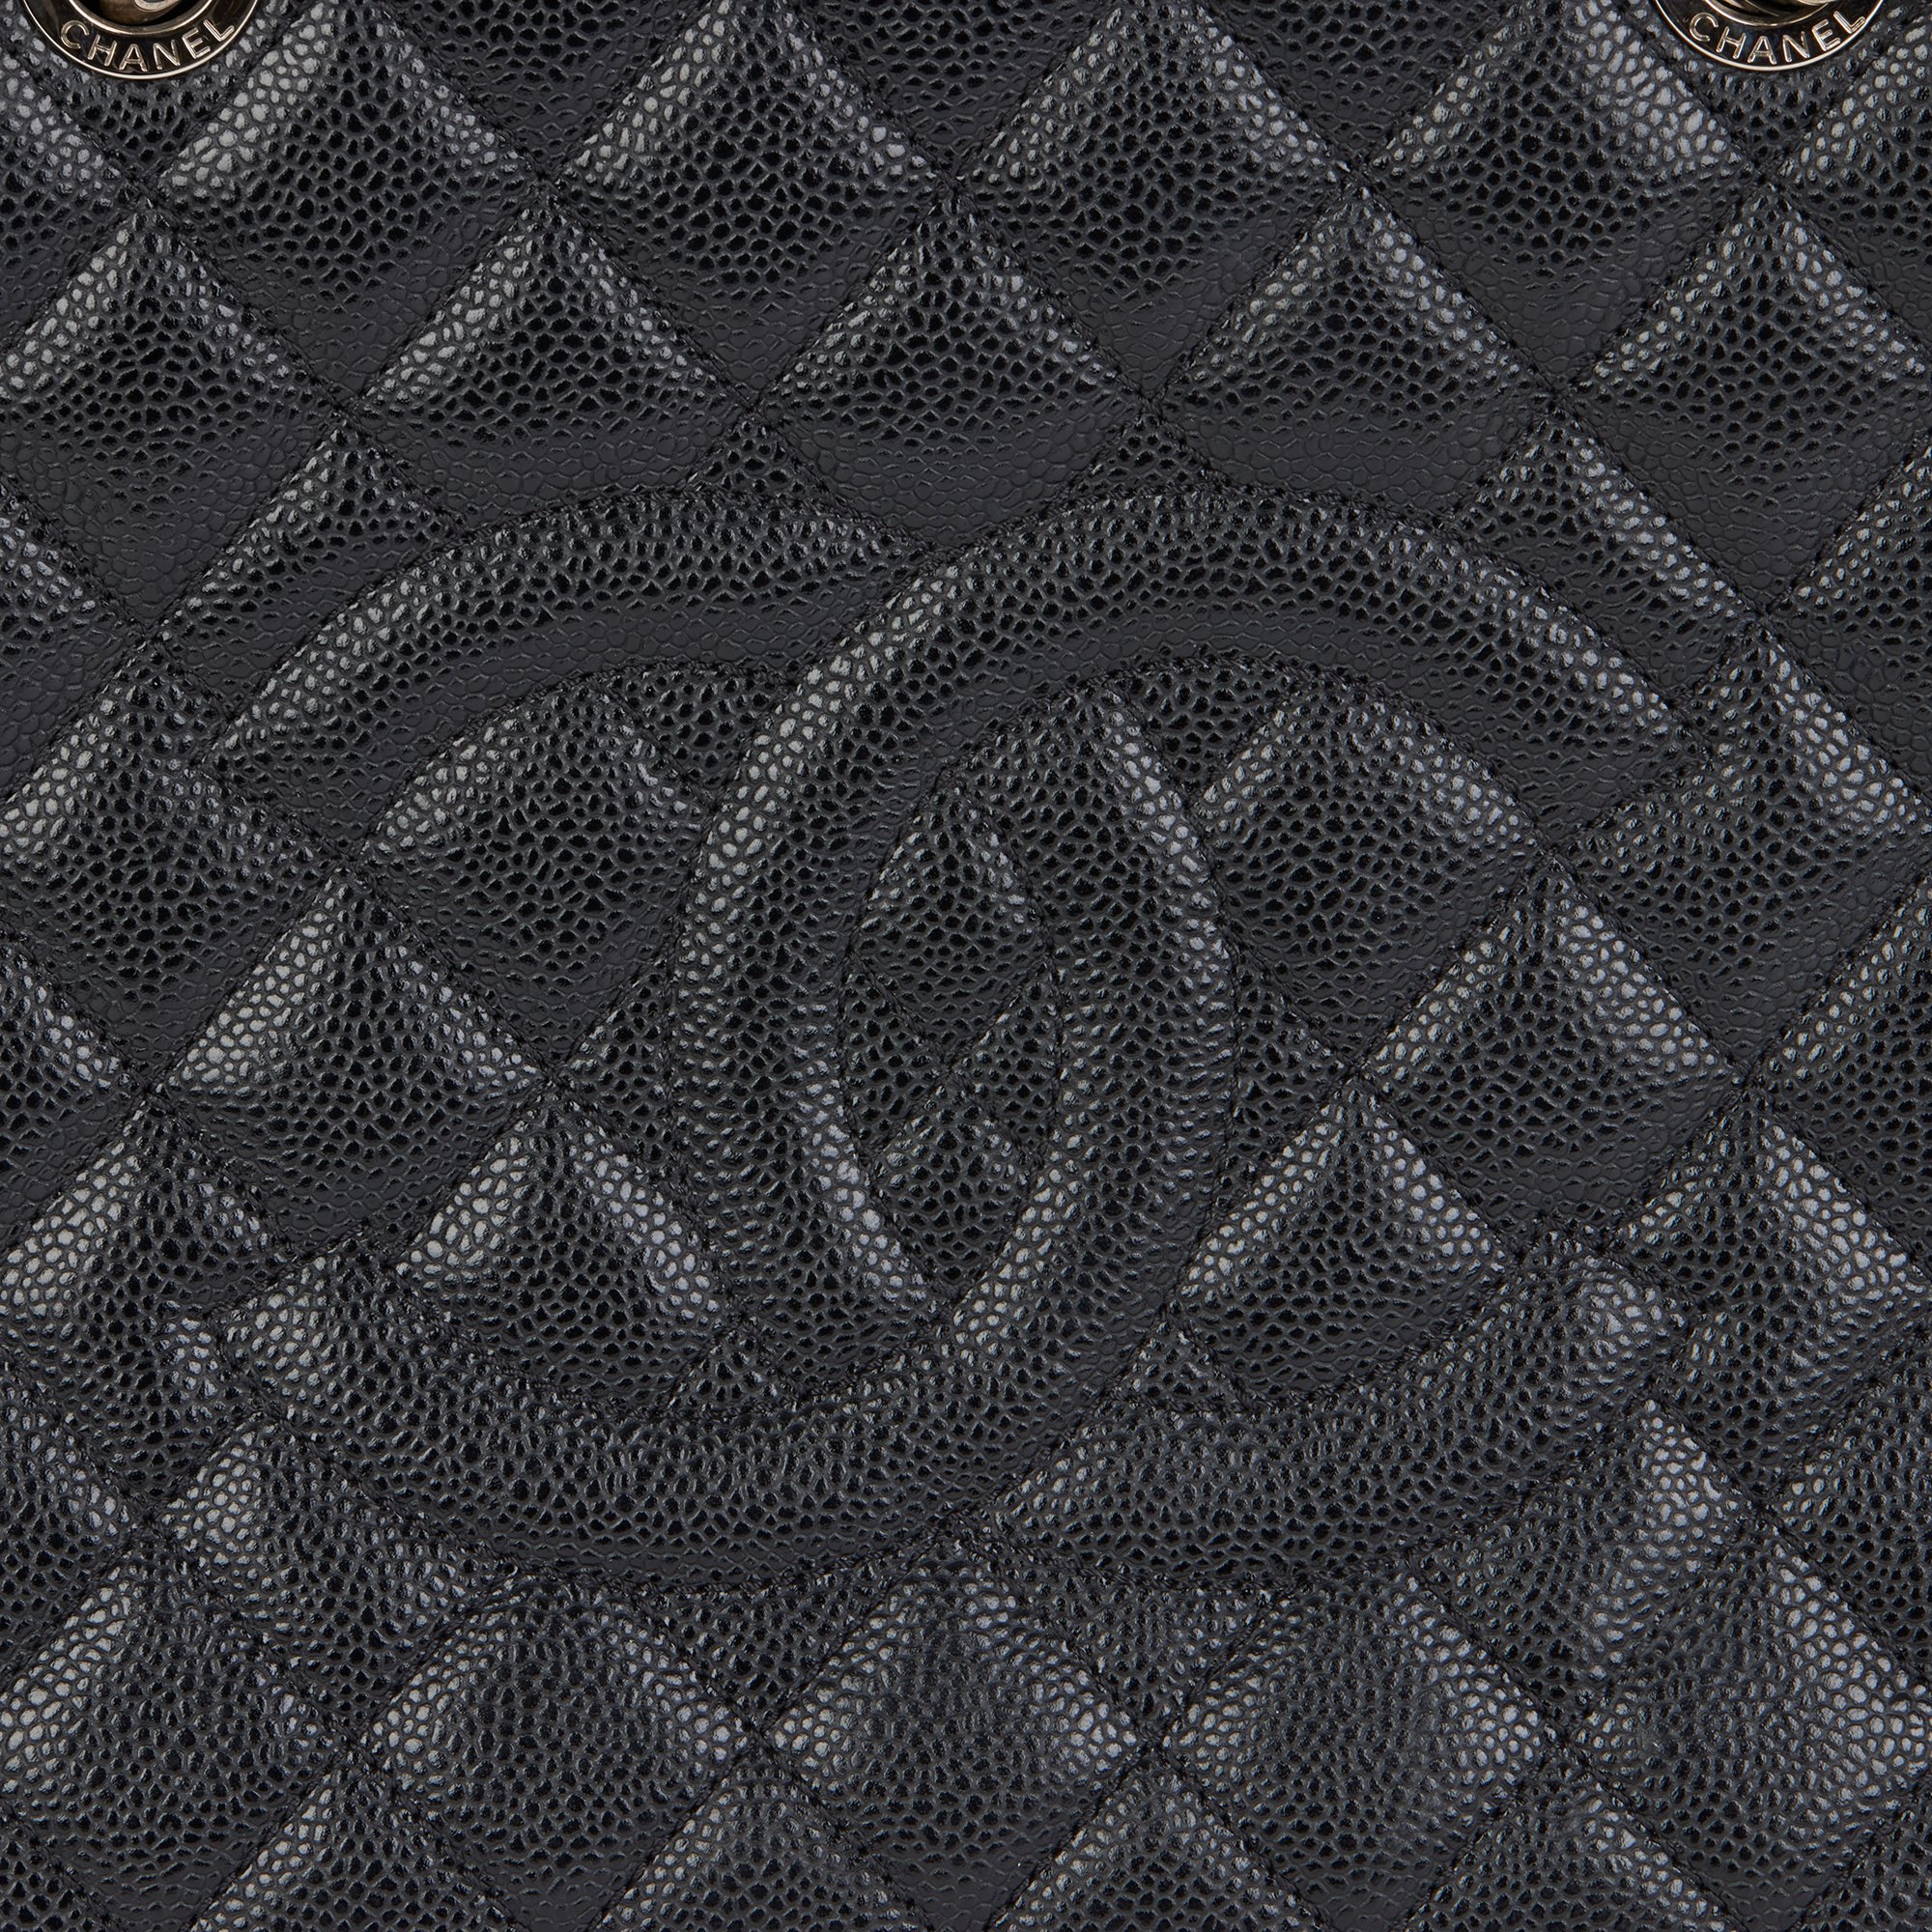 Chanel Black Quilted Caviar Leather Grand Shopping Tote